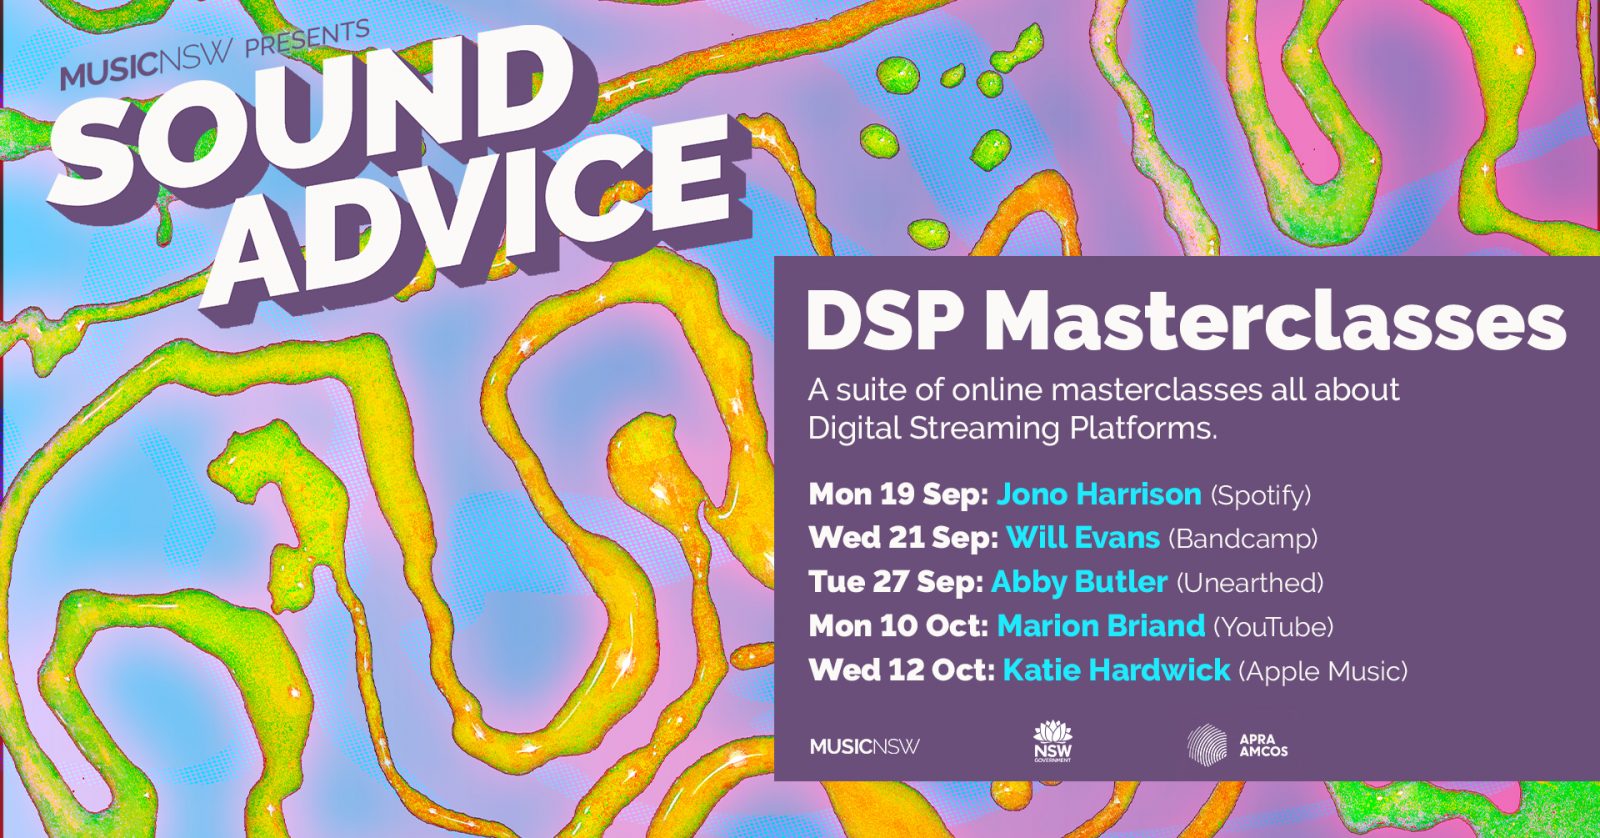 Sound Advice Banner for DSP event. Event details on a purple background all on a colourful swirling background.